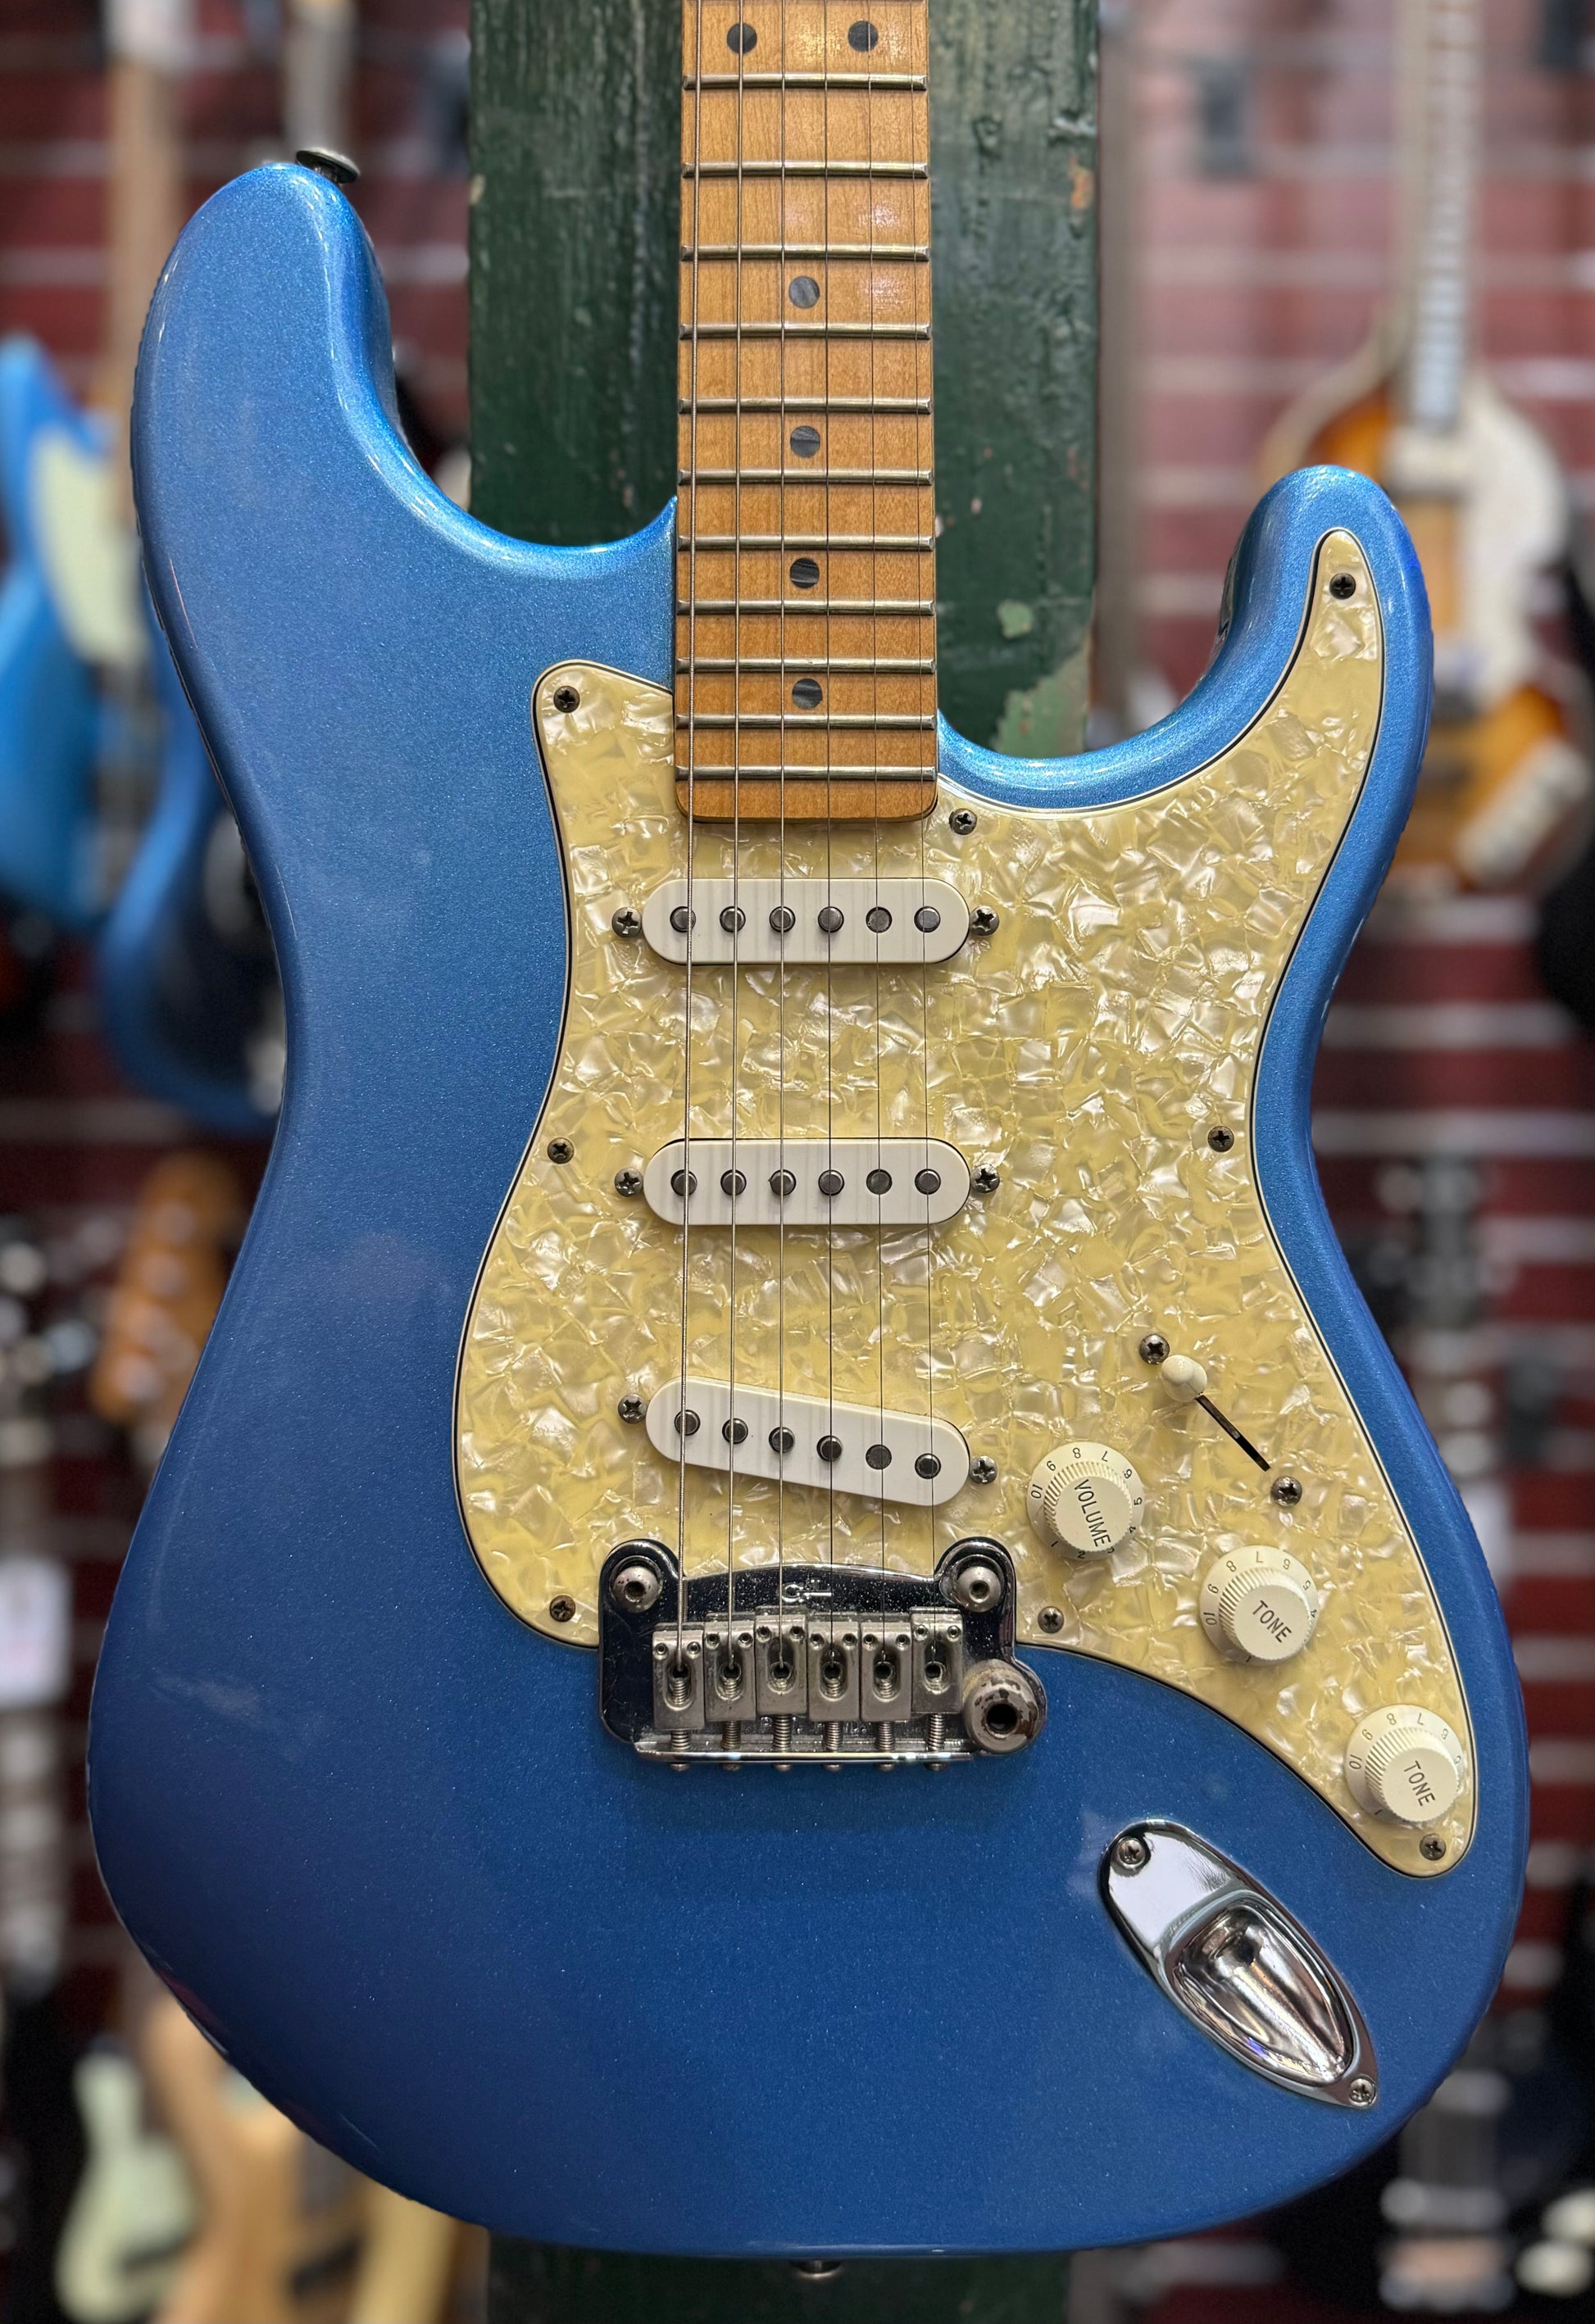 G&L Legacy USA - Emerald Blue - Pre-Loved – Guitar Brothers Online